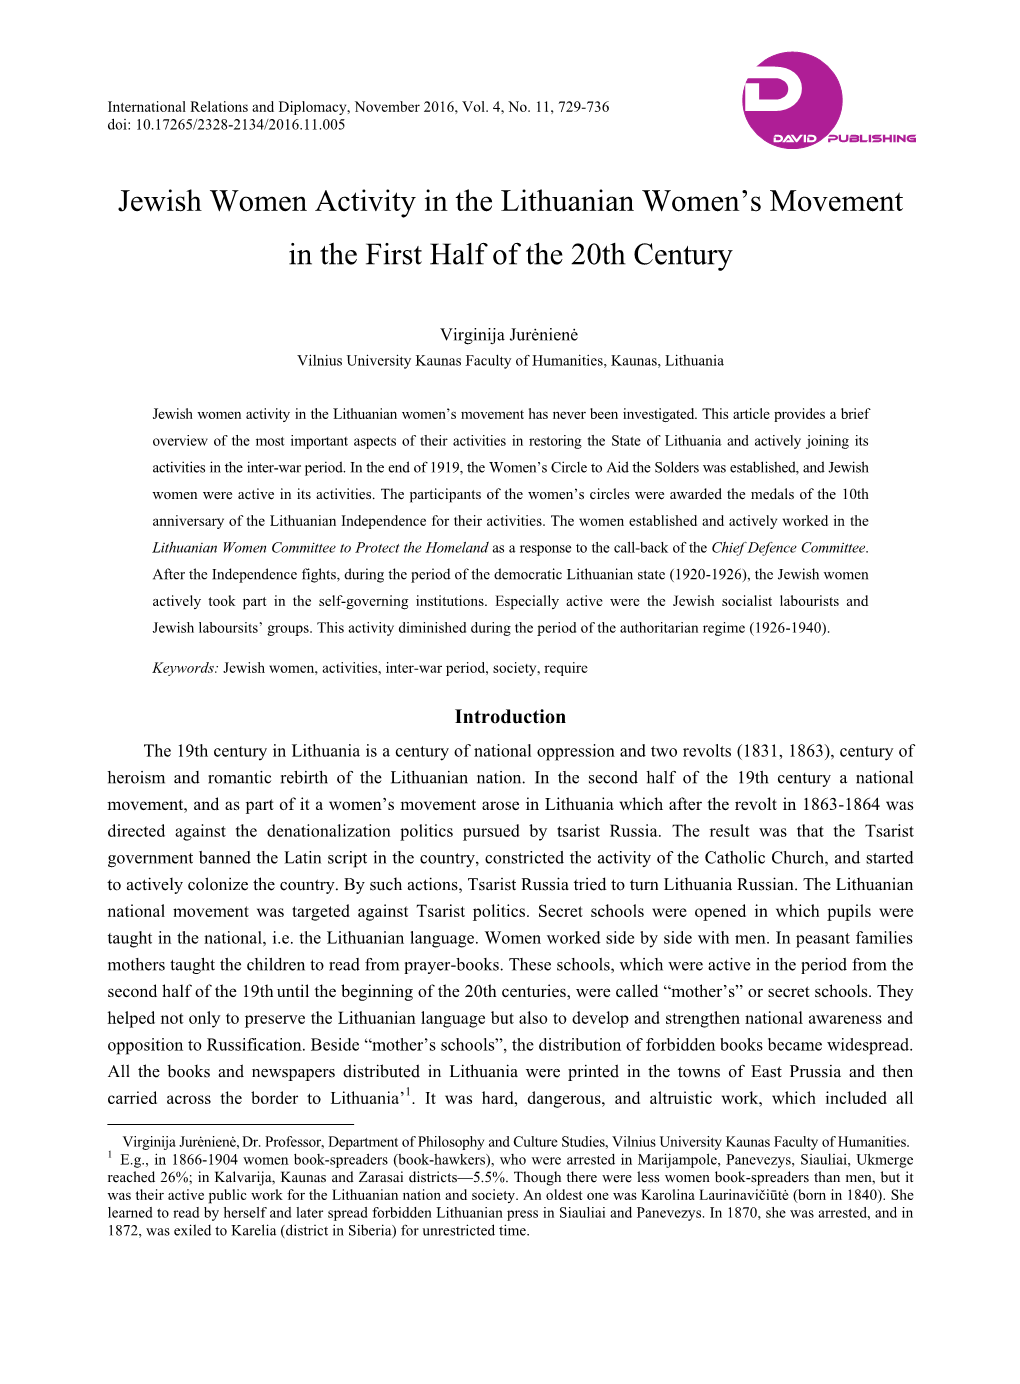 Jewish Women Activity in the Lithuanian Women's Movement In